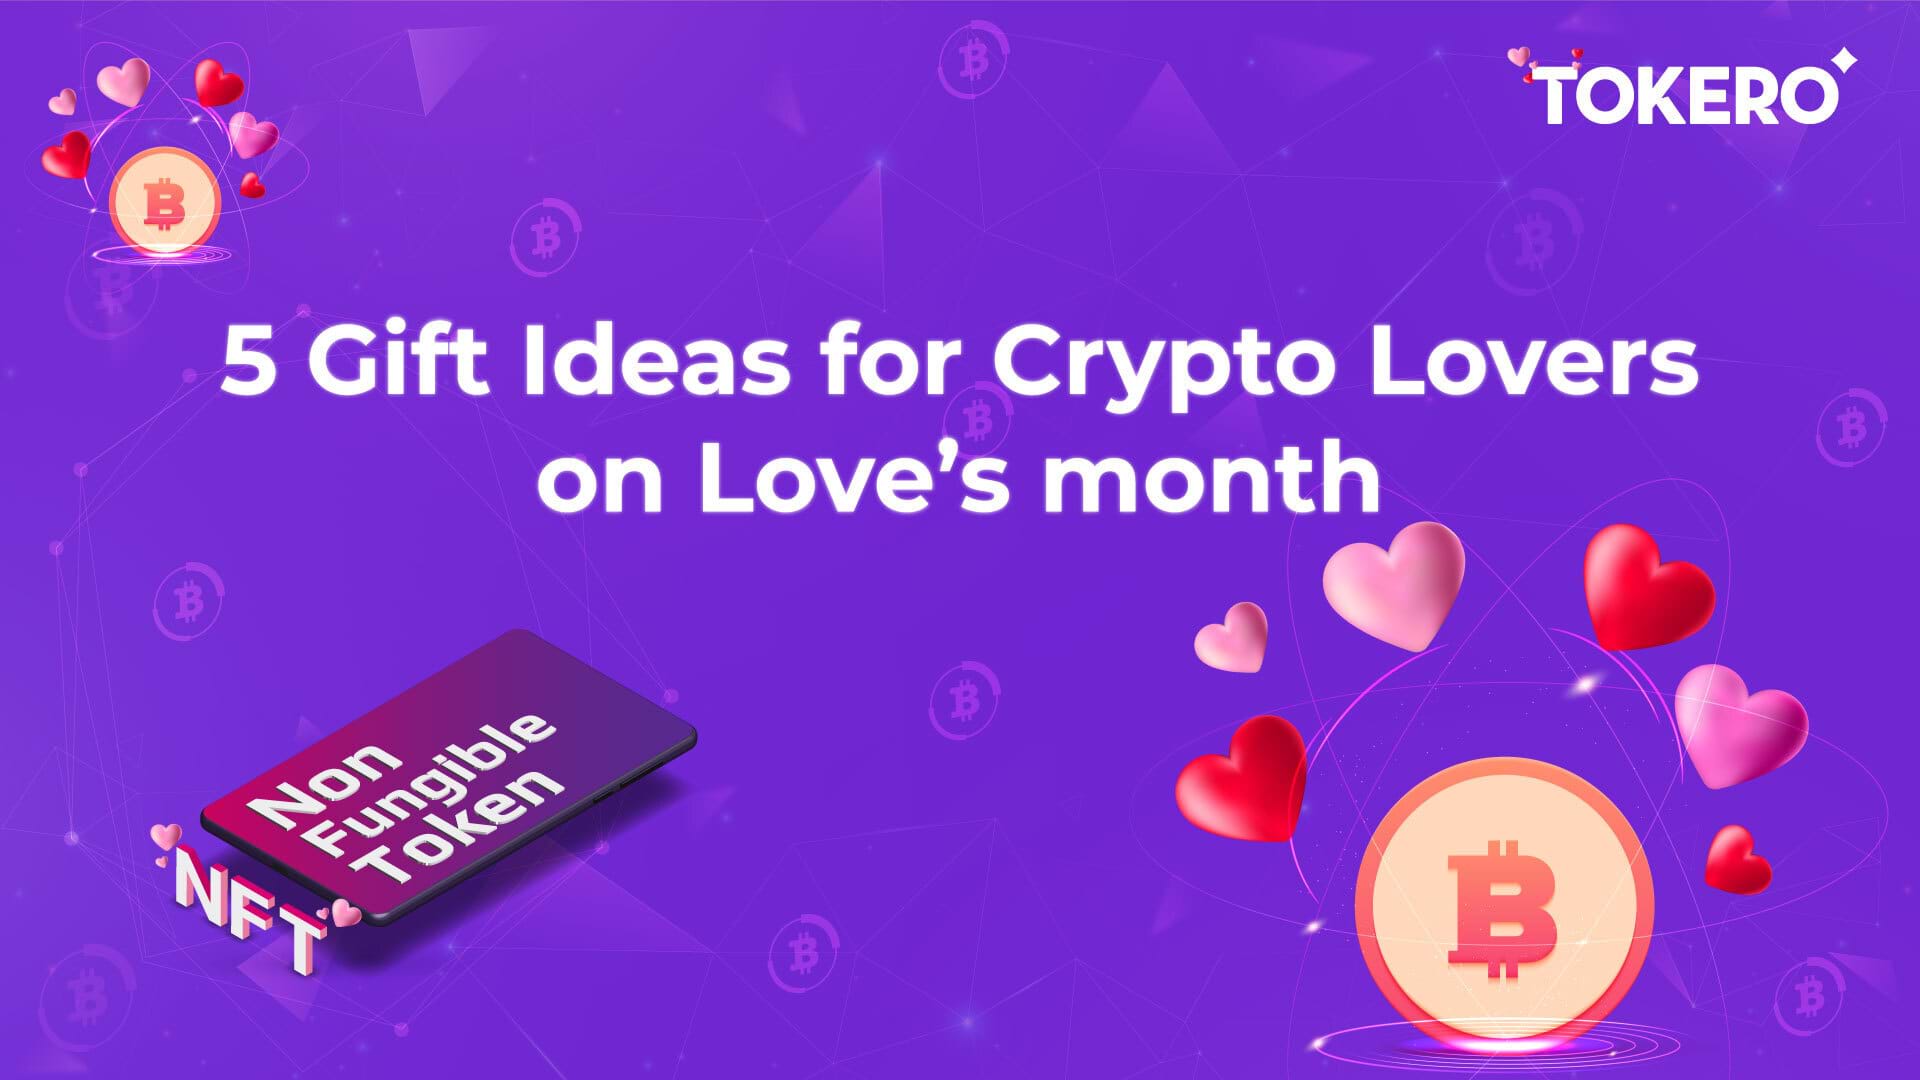 Surprise your partner on love's month!